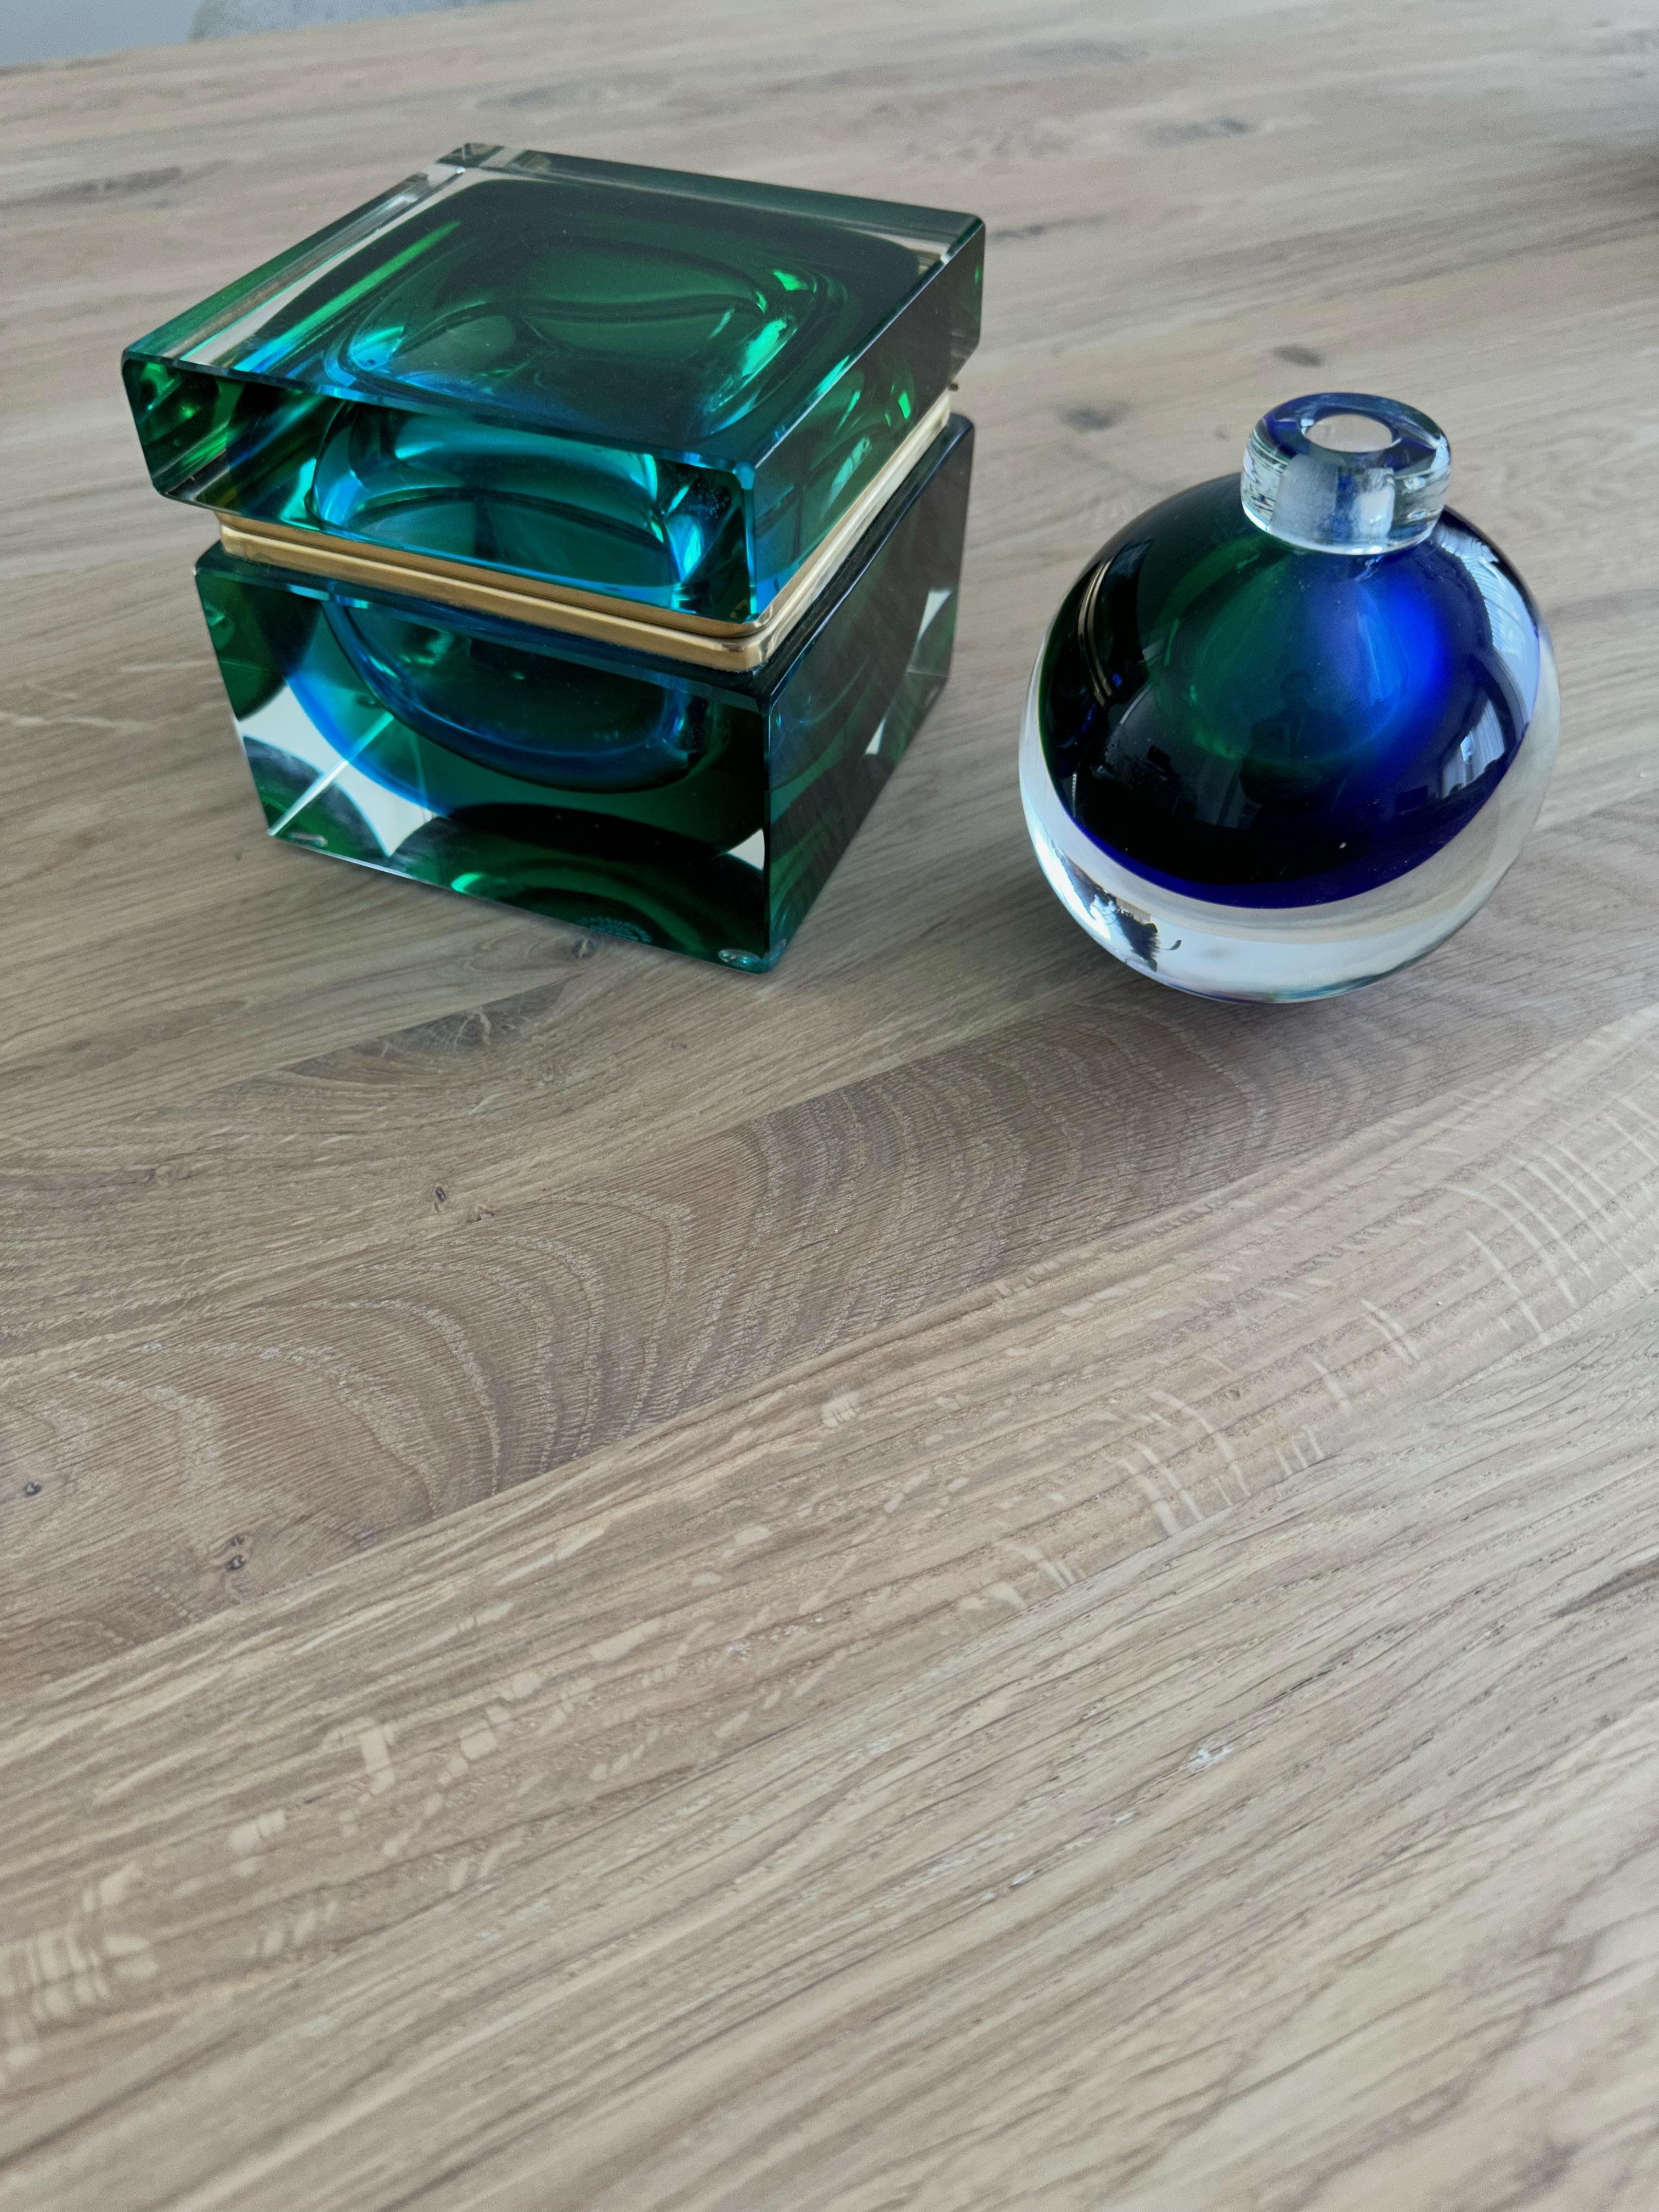 Hand-Crafted Exceptional Color Murano Glass Art Box with Vase Design & Marked by Mandruzzato